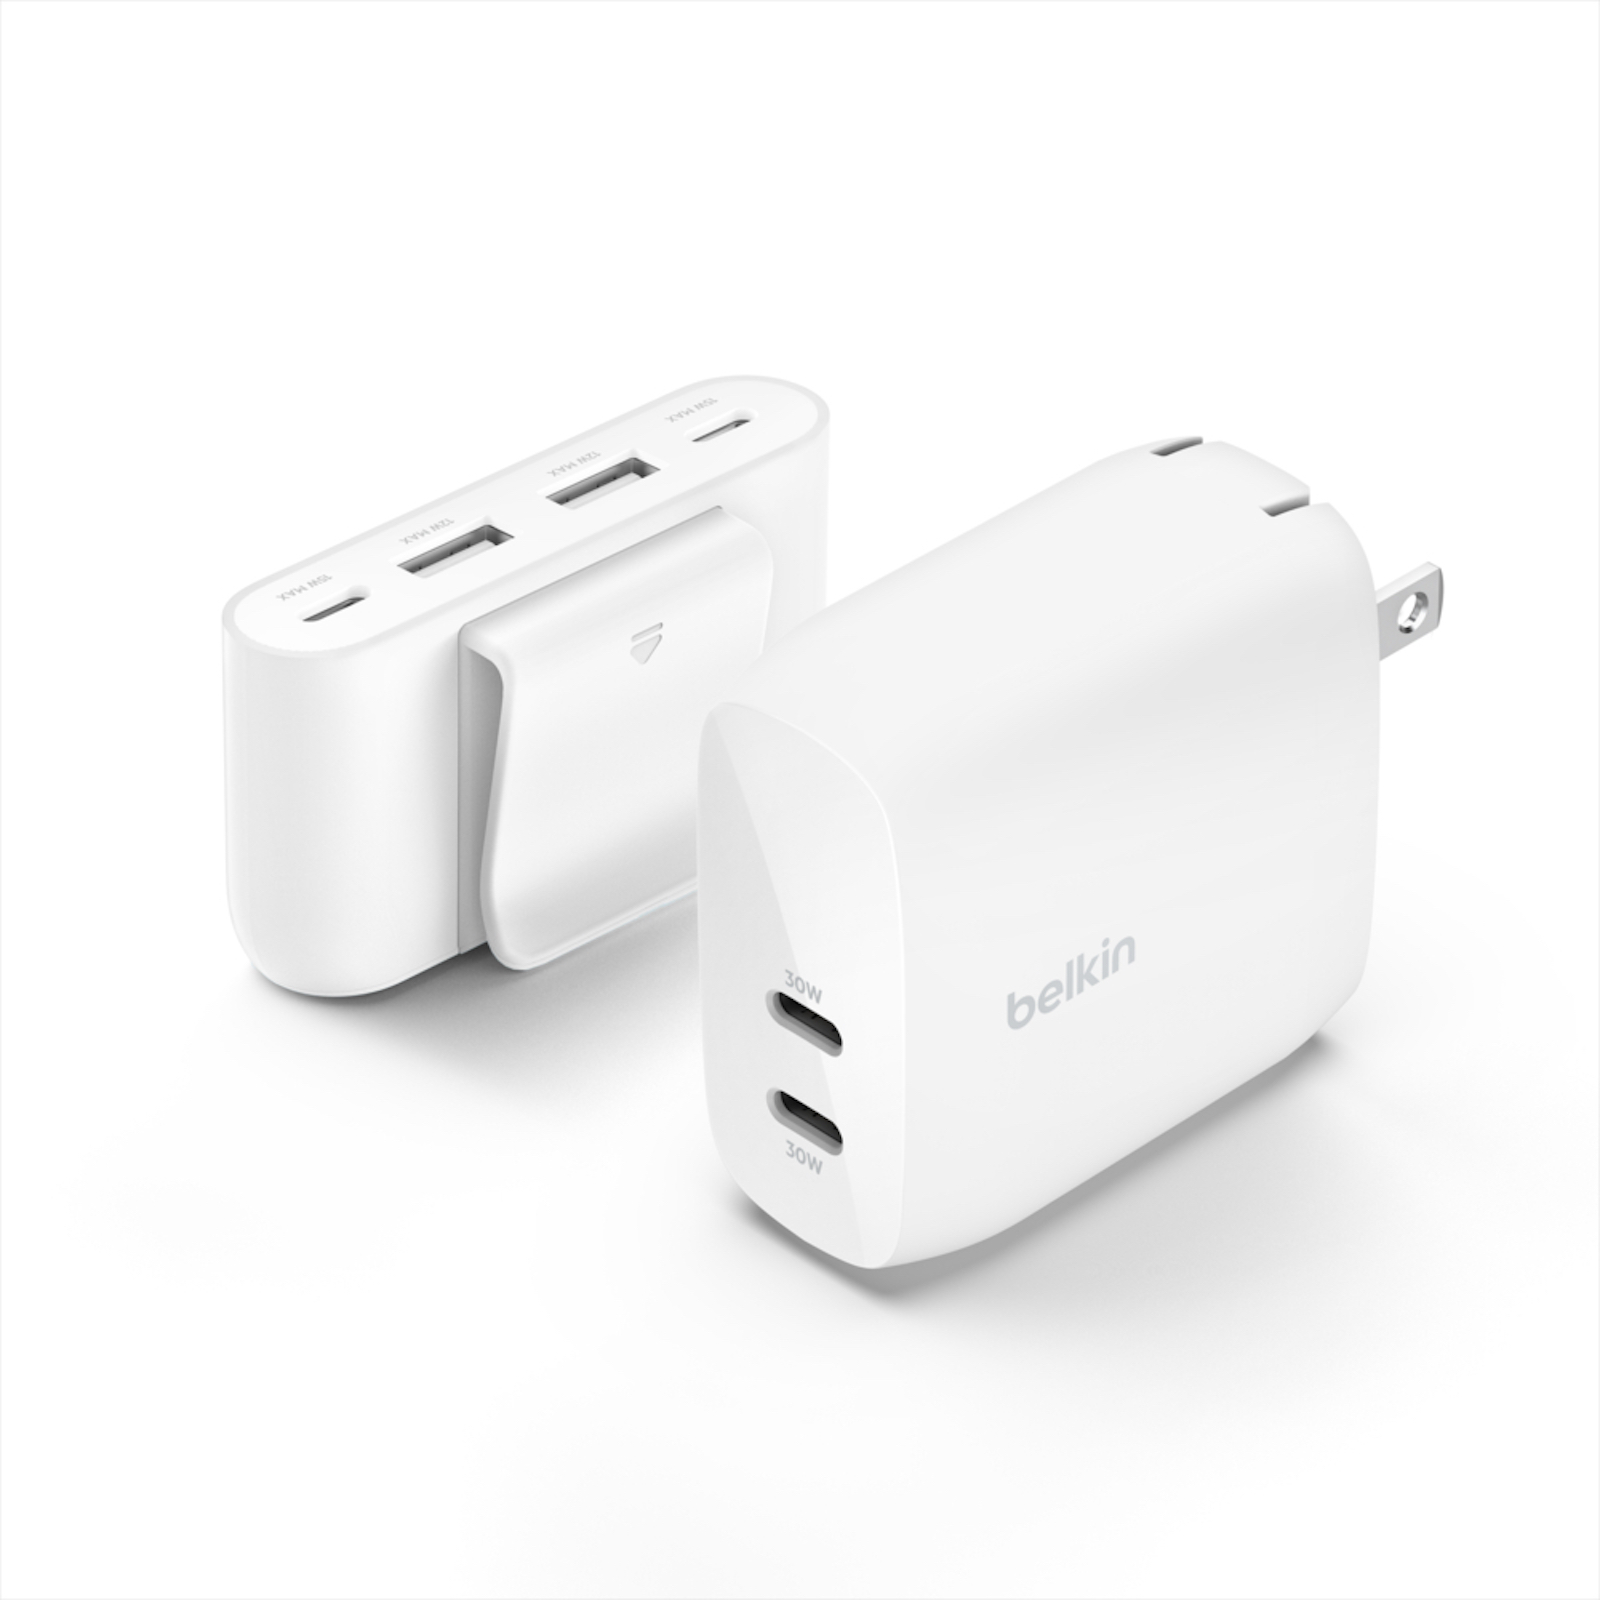 Belkin-4port-power-extender-and-60w-charger.jpg